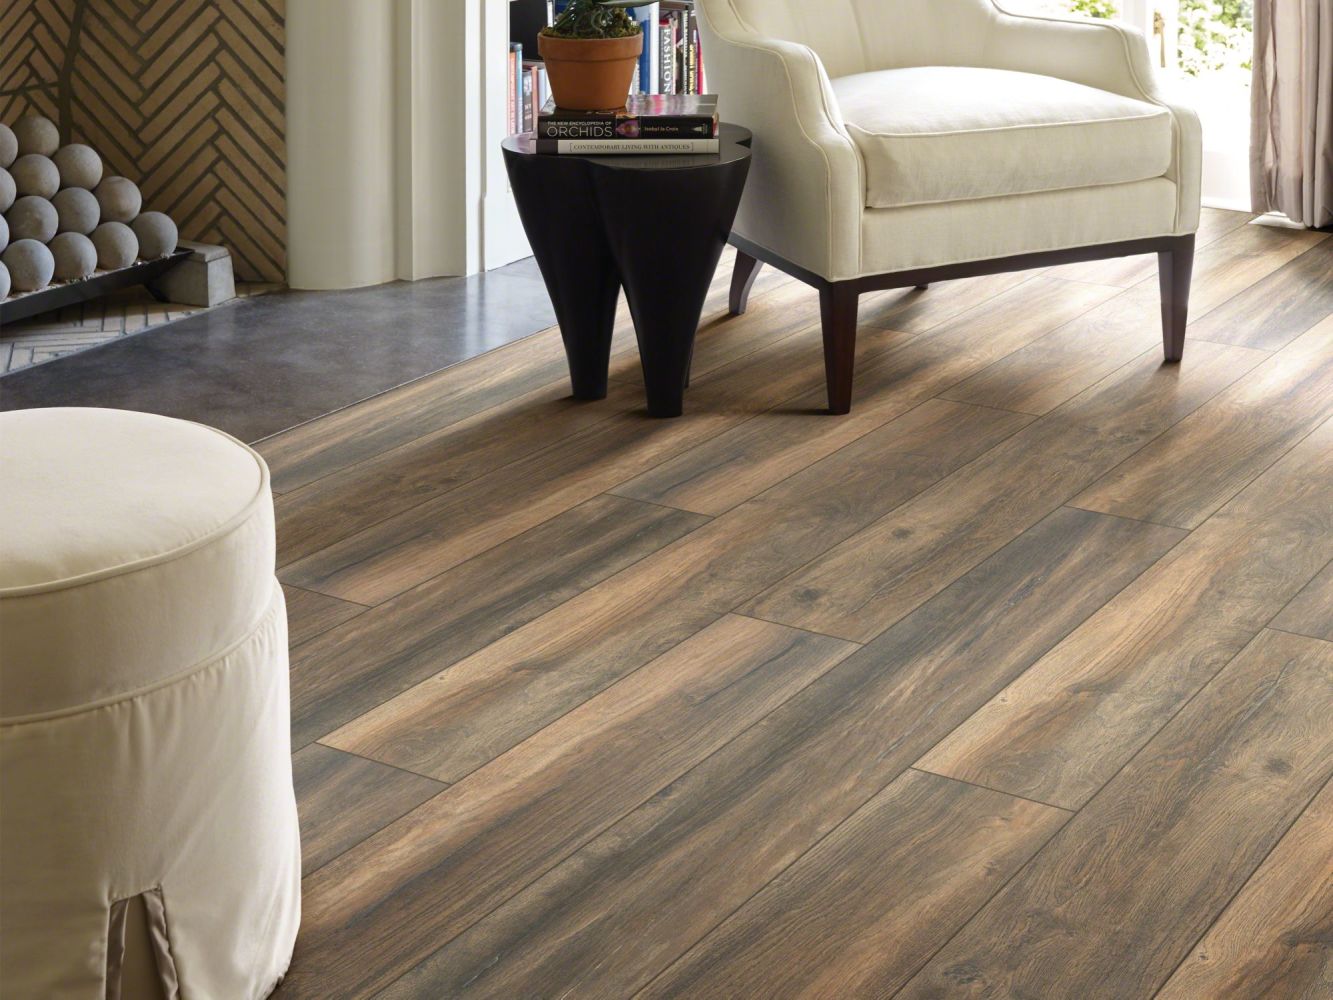 Shaw Floors Pulte Home Hard Surfaces, Island Taupe Laminate Flooring